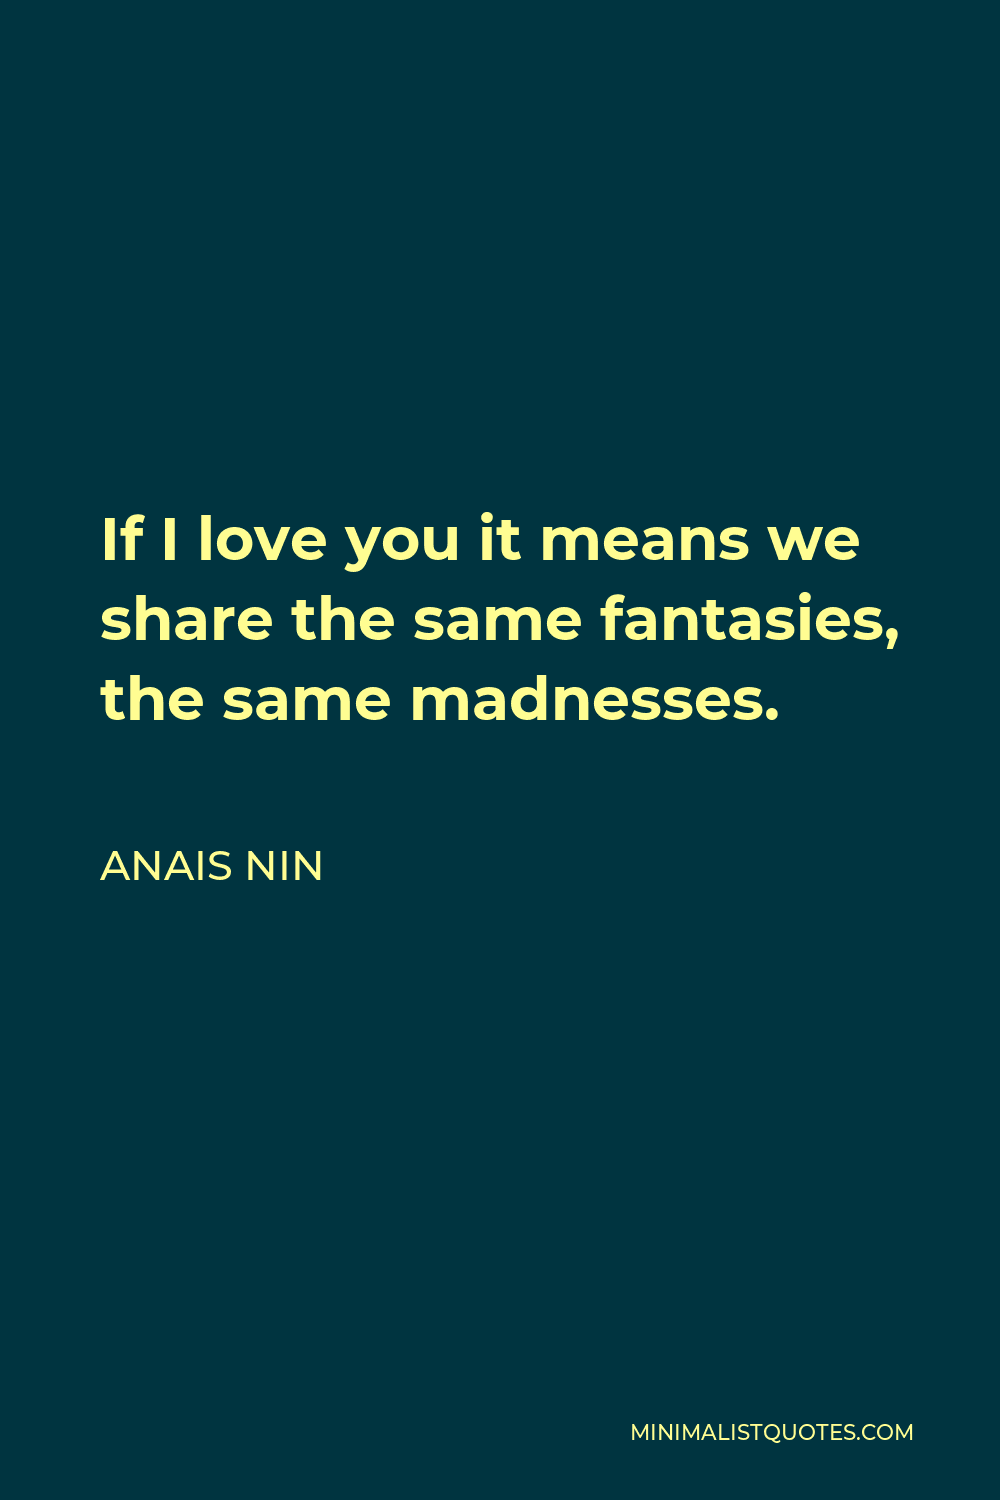 Anais Nin Quote - If I love you it means we share the same fantasies, the same madnesses.